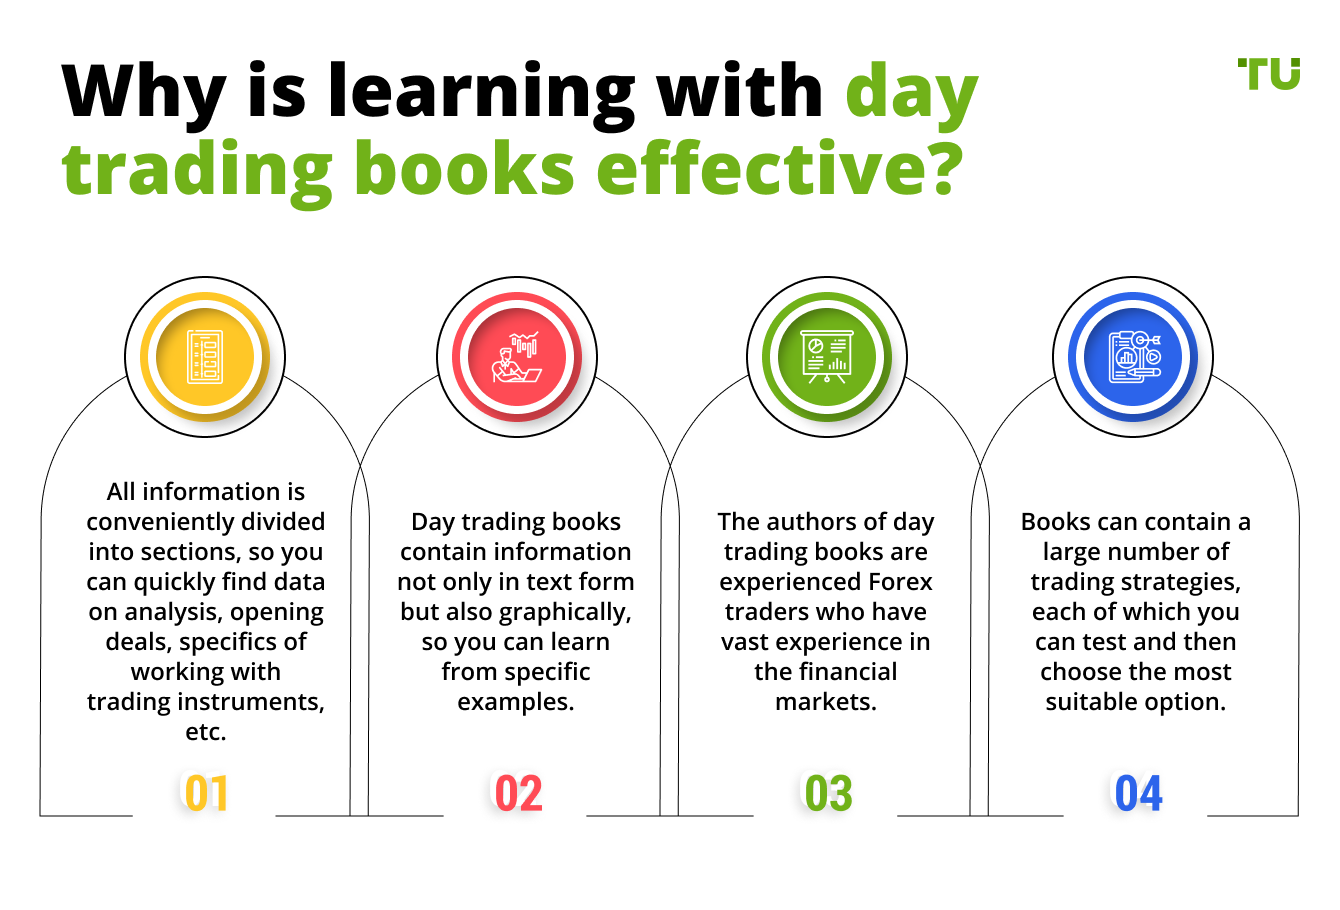 Why is learning with day trading books effective?